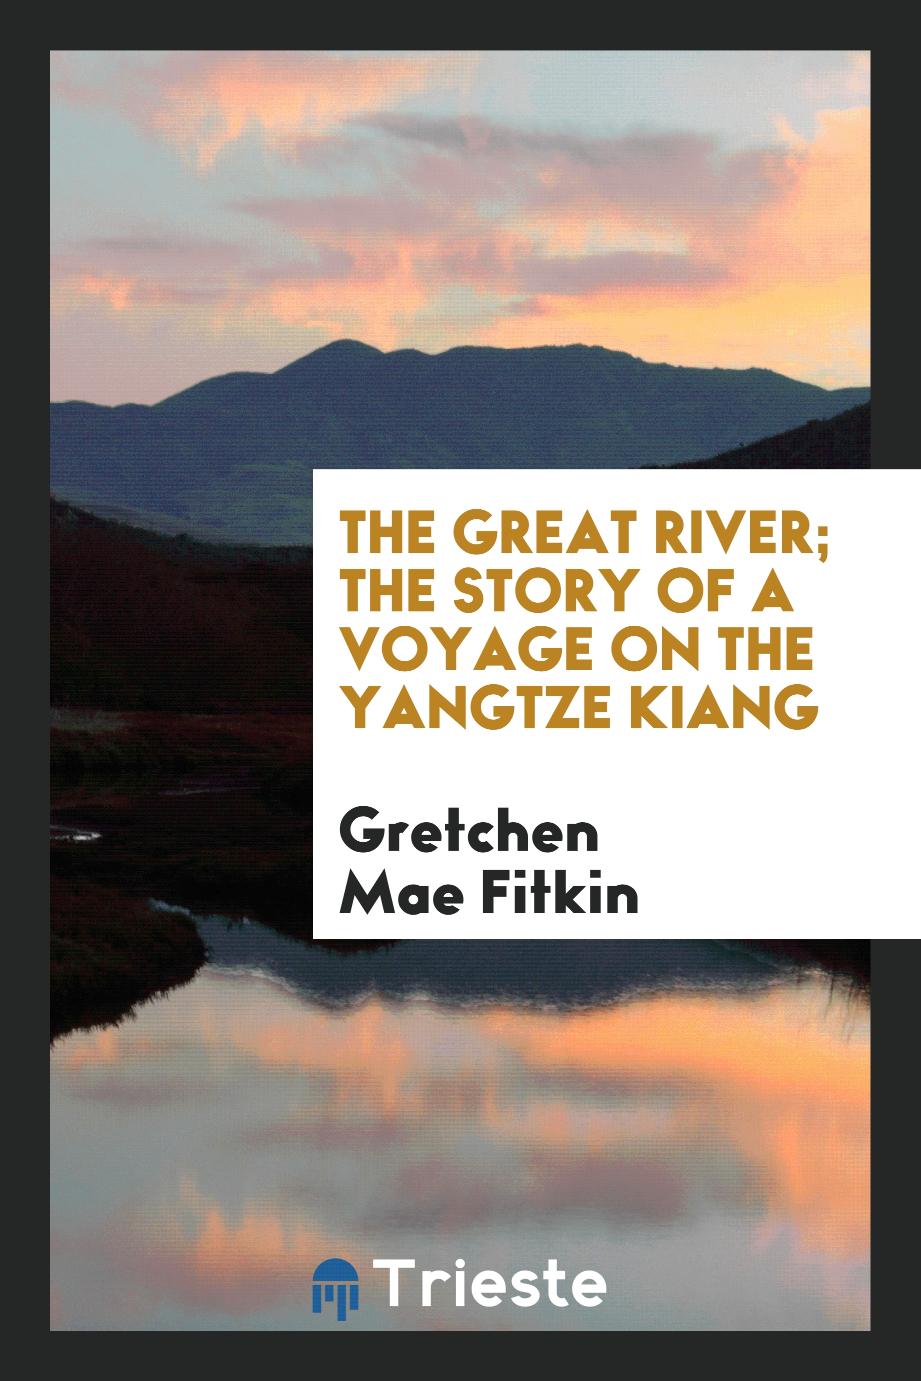 The great river; the story of a voyage on the Yangtze Kiang